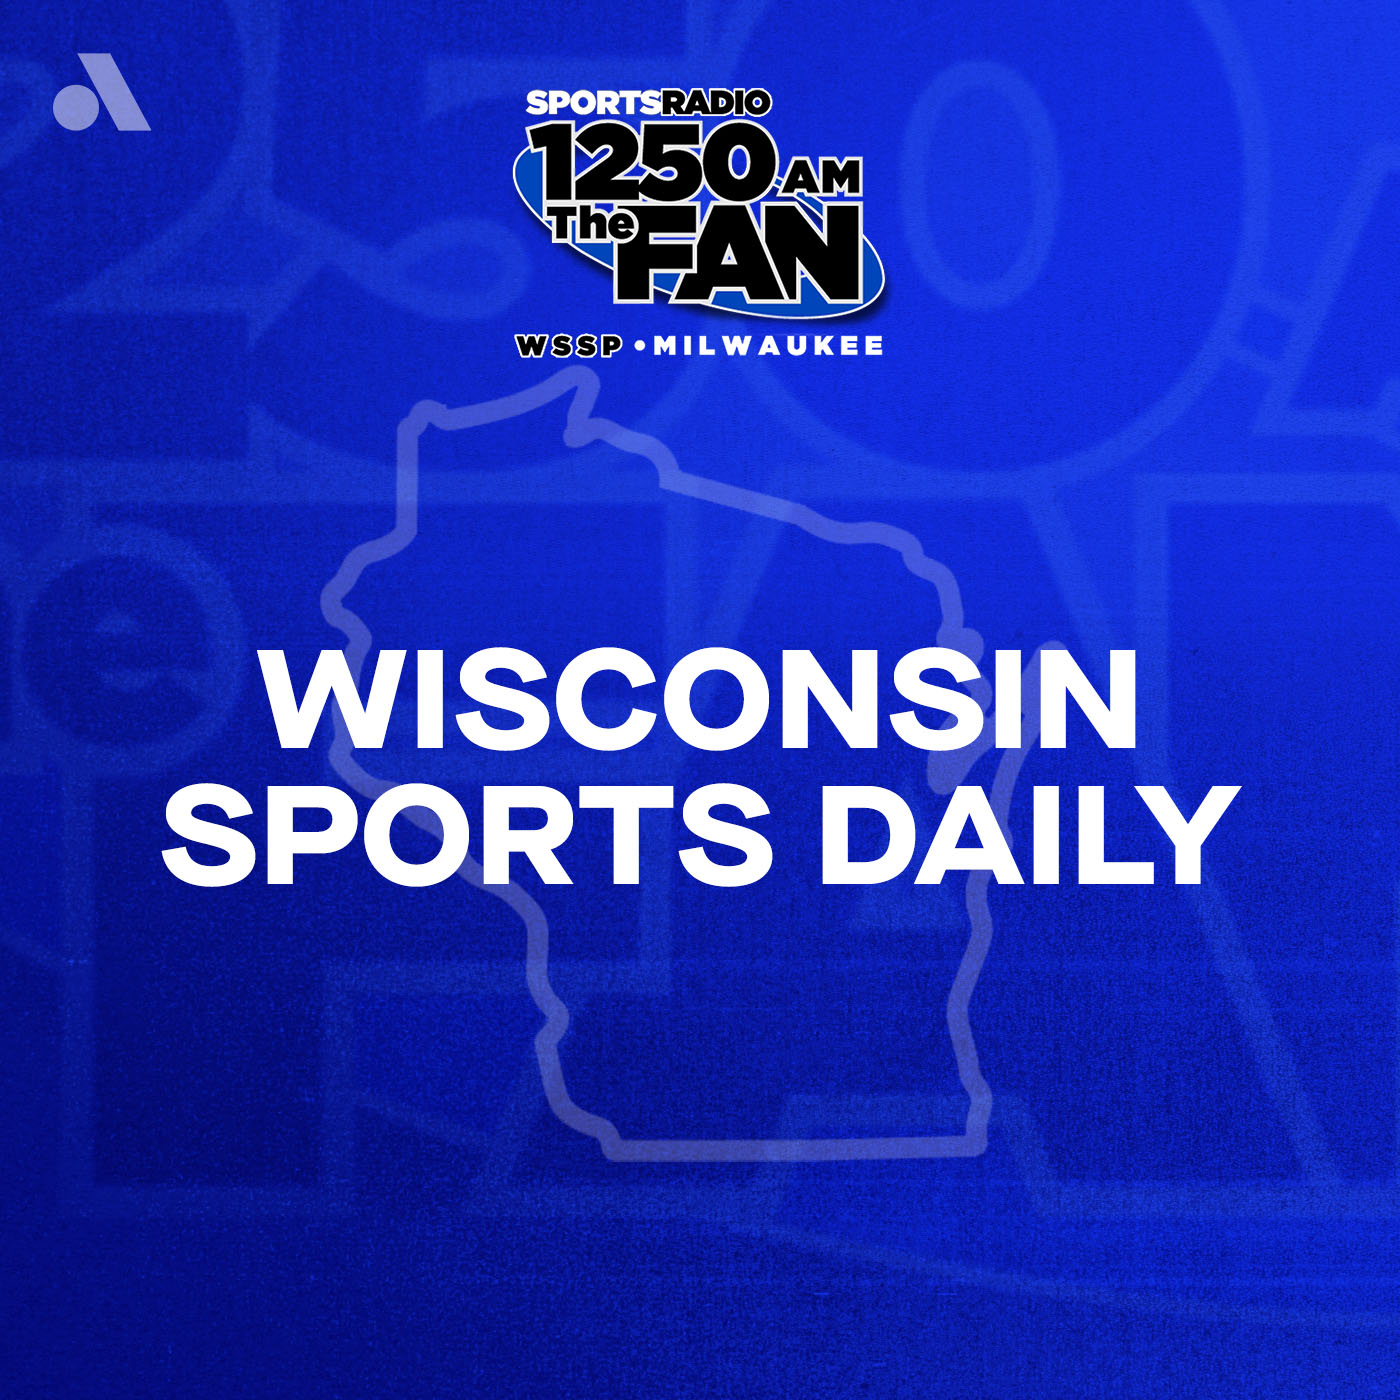 Monday, April 15th: 2nd Hour Of Wisconsin Sports Daily - Moved On From Counsell Leaving For Cubs Yet? - Christian Yelich Hot And Hurt